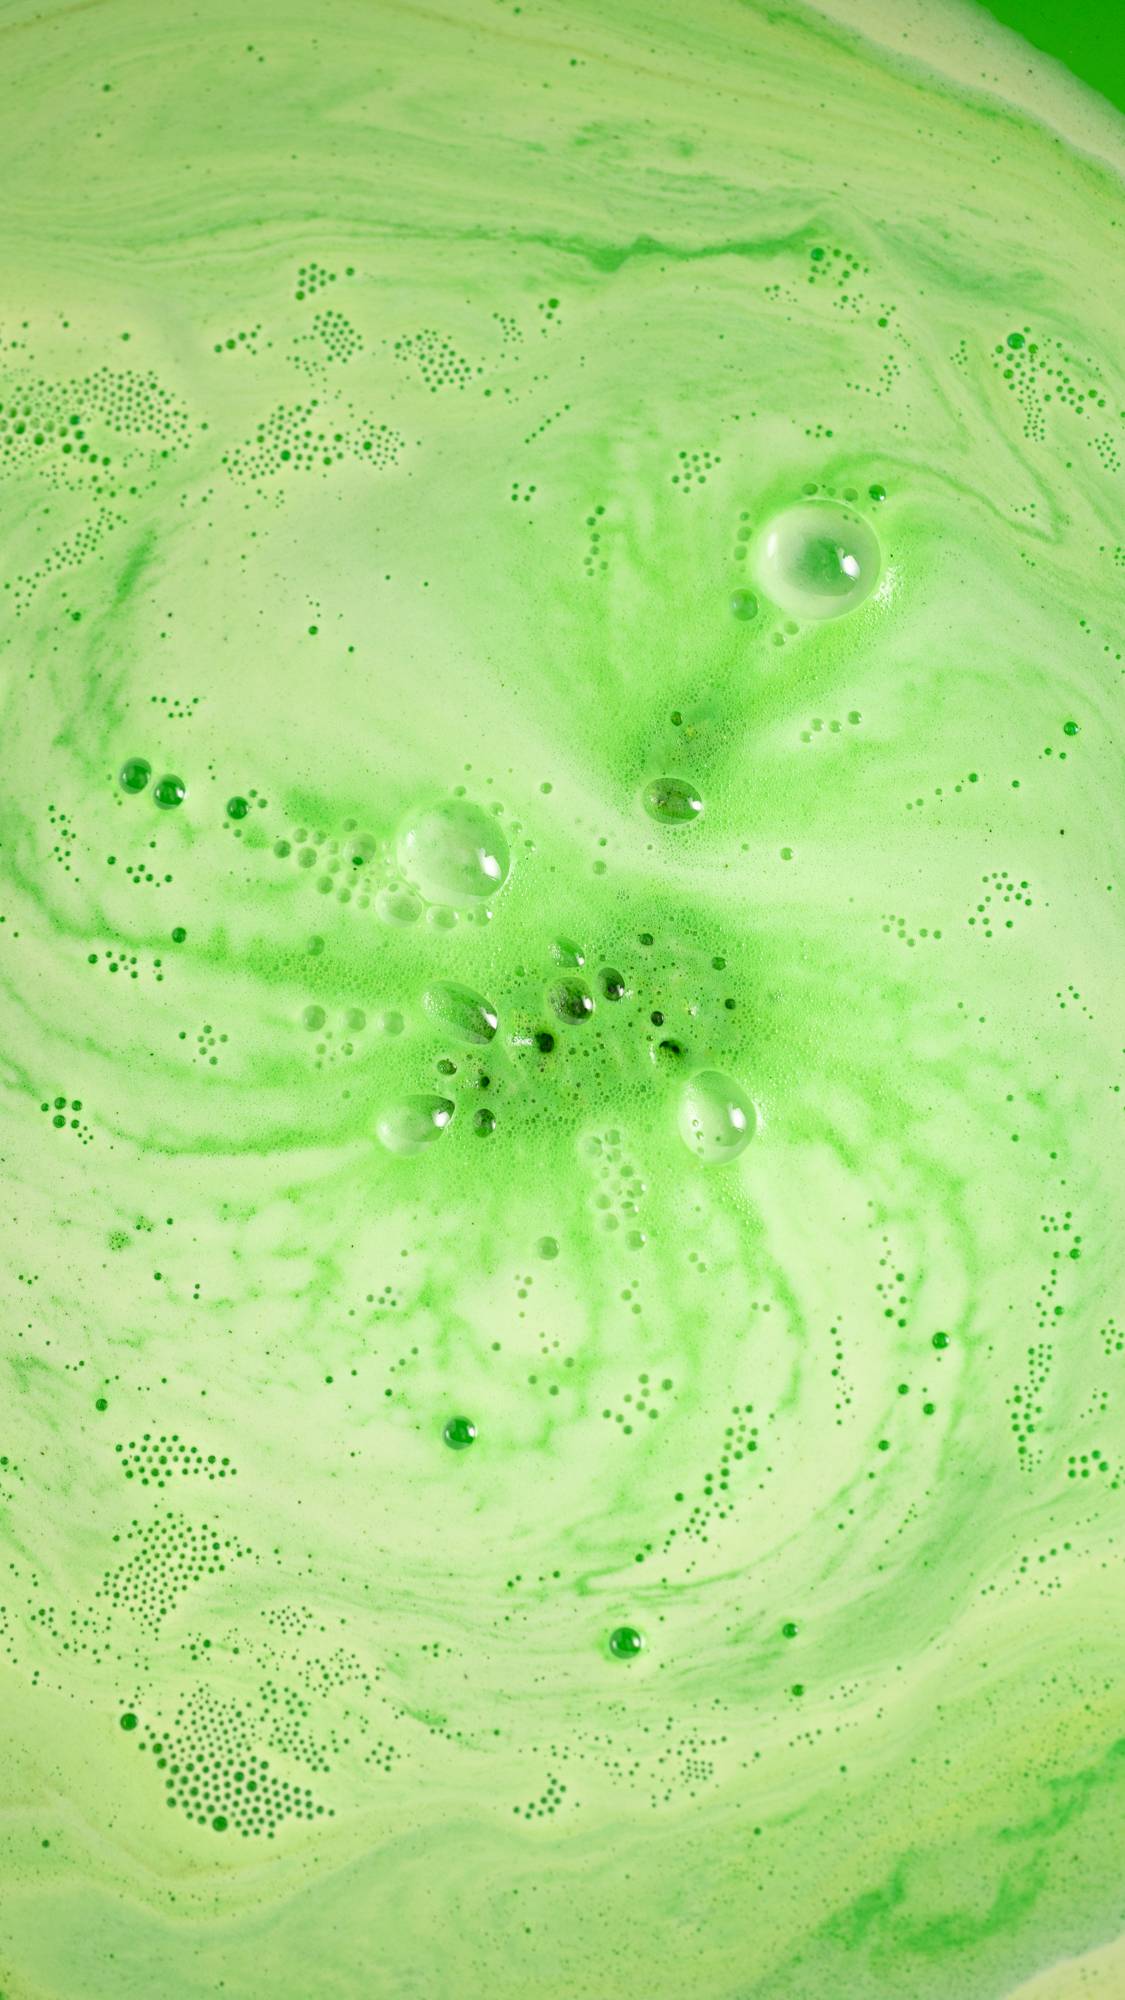 The Dinosaur in a Crisis bath bomb has almost fully dissolved leaving a velvety green sea of thick foamy bubbles. 